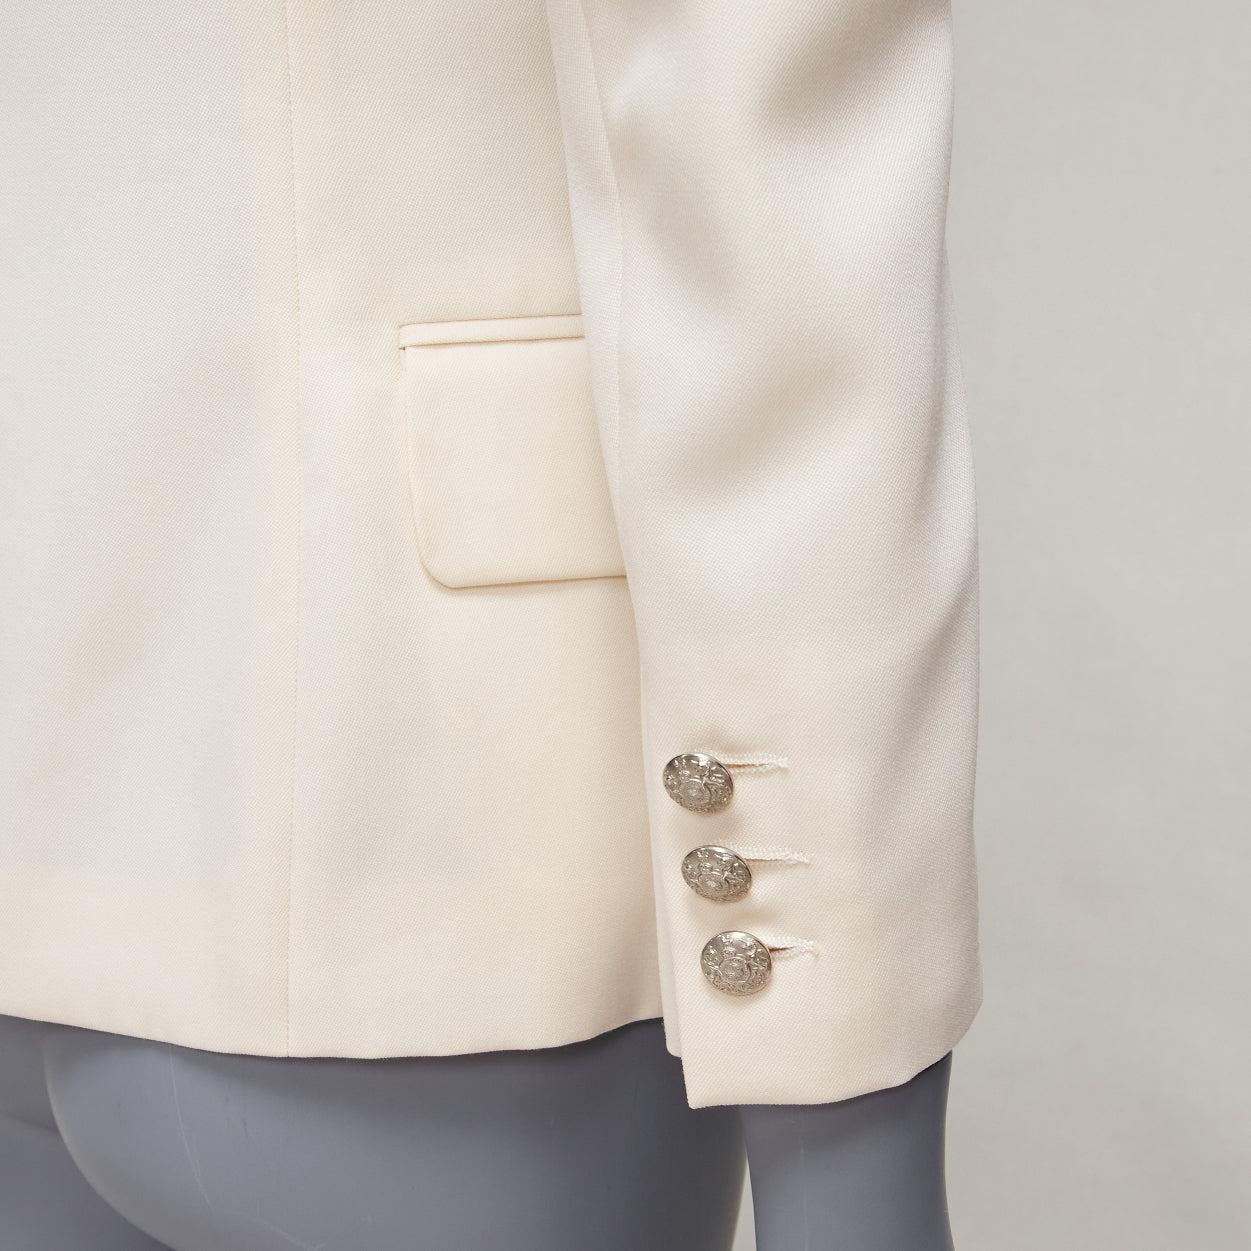 BALMAIN cream pagoda peak power shoulder single button tuxedo jacket FR38 S
Reference: NKLL/A00177
Brand: Balmain
Designer: Olivier Rousteing
Material: Wool
Color: Cream
Pattern: Solid
Closure: Button
Lining: White Viscose
Extra Details: Strong